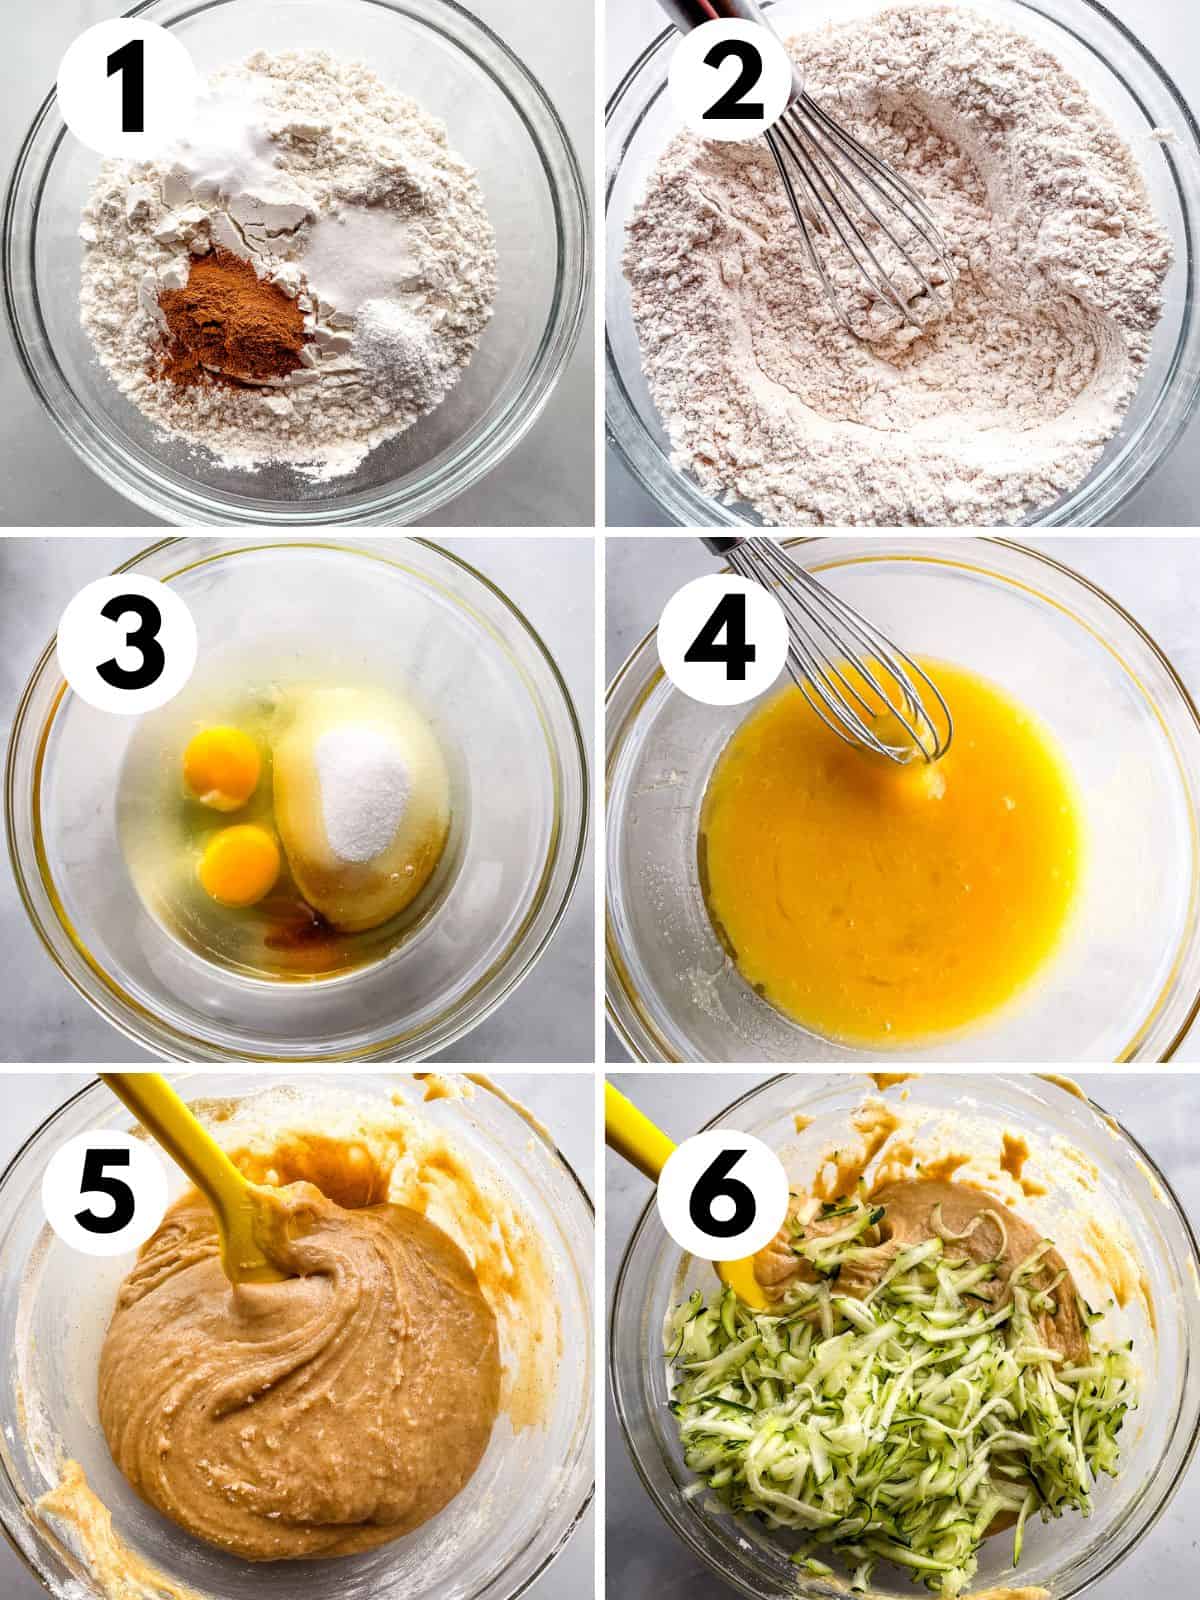 First six steps for mixing gluten-free zucchini muffin batter. 1. Dry ingredients in a bowl 2. Mixed dry ingredients. 3. Wet ingredients in a separate bowl. 4. Mixed wet ingredients. 5. Batter. 6. Adding shredded zucchini to batter.